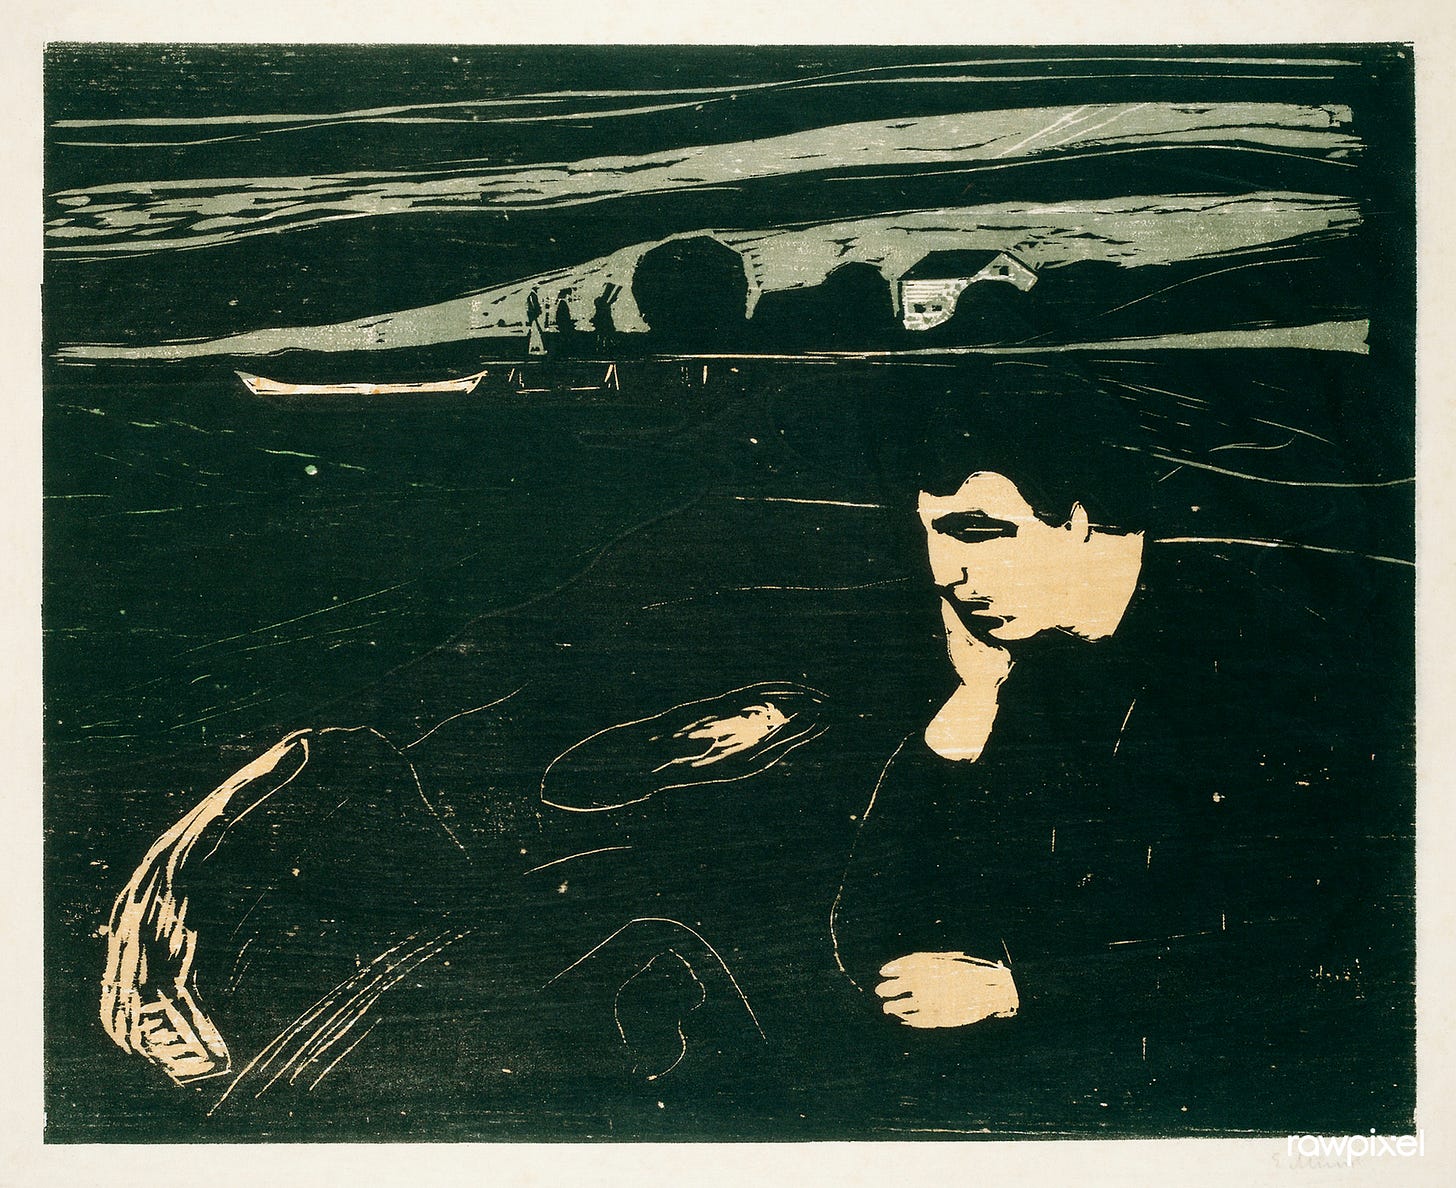 Melancholy III (1902) by Edvard Munch. Original from The Art Institute of Chicago. Digitally enhanced by rawpixel.